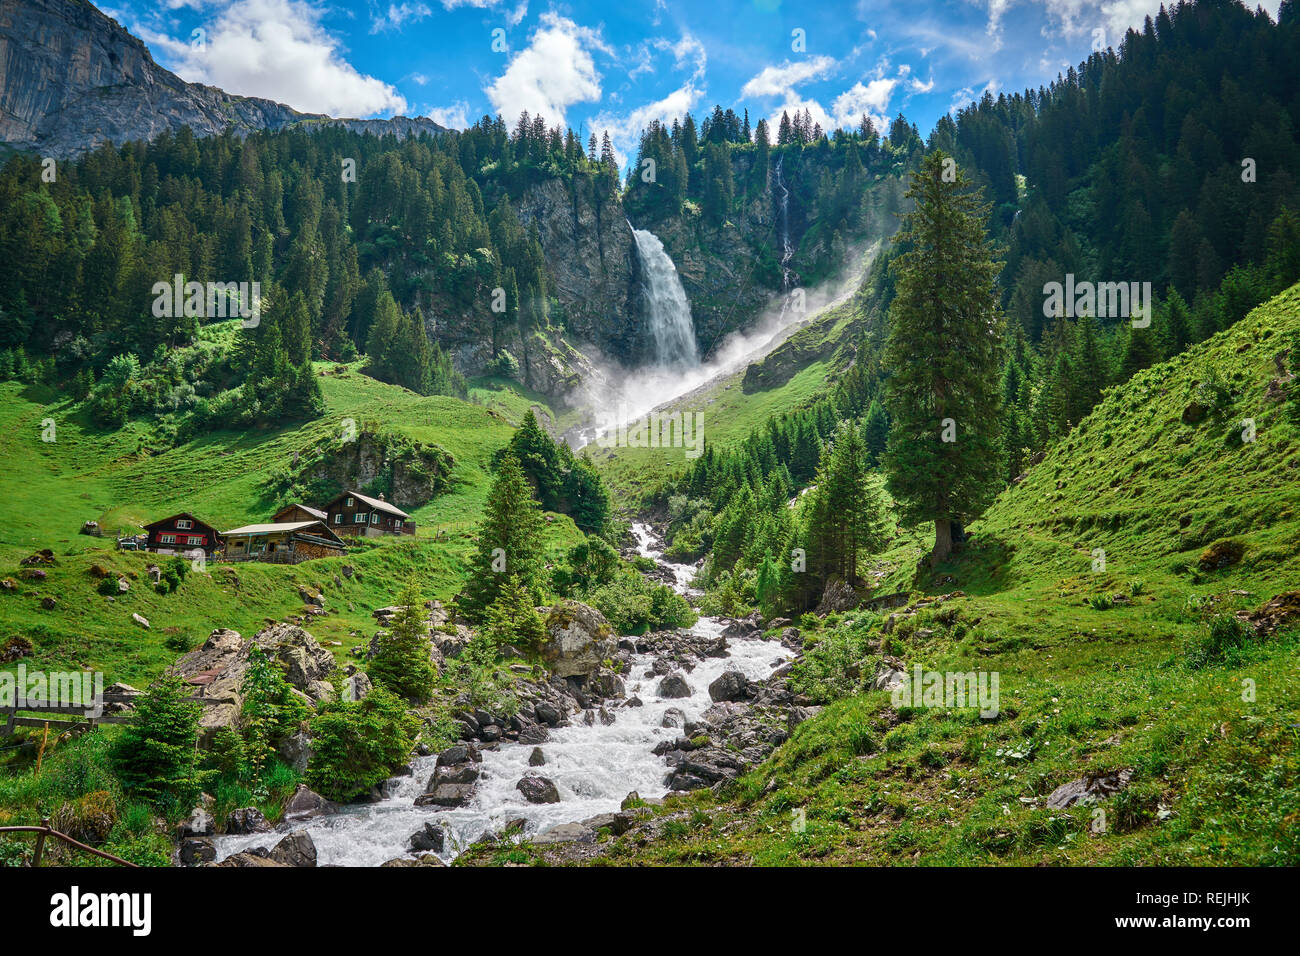 Beautiful landscape panorama from Swiss Alps, with cows, waterfall, meadow and farm houses. Taken in Äsch (Asch) village, canton of Uri, Switzerland. Stock Photo